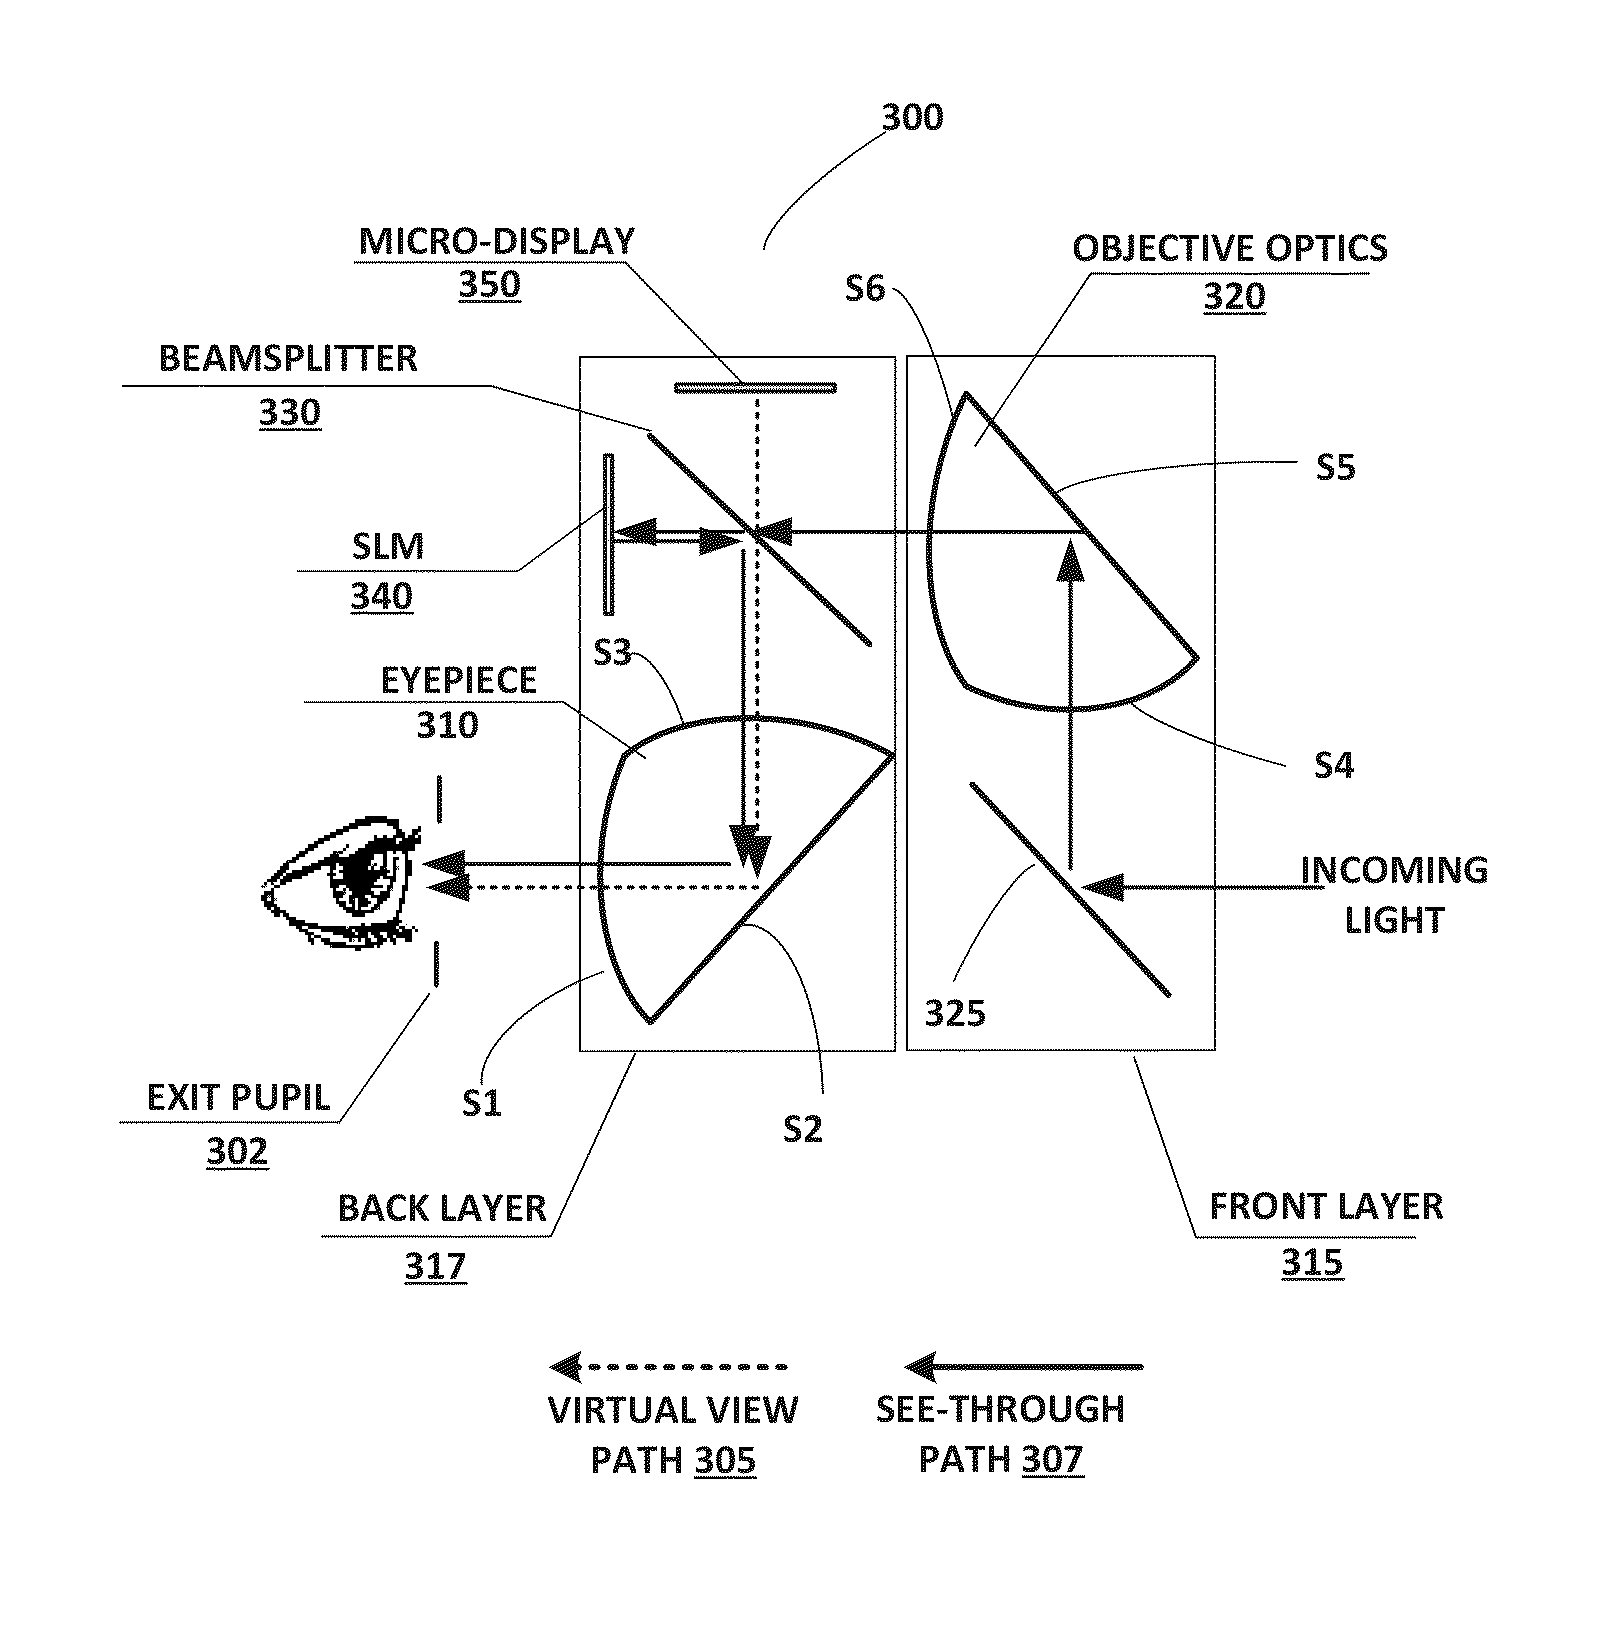 Apparatus for optical see-through head mounted display with mutual occlusion and opaqueness control capability